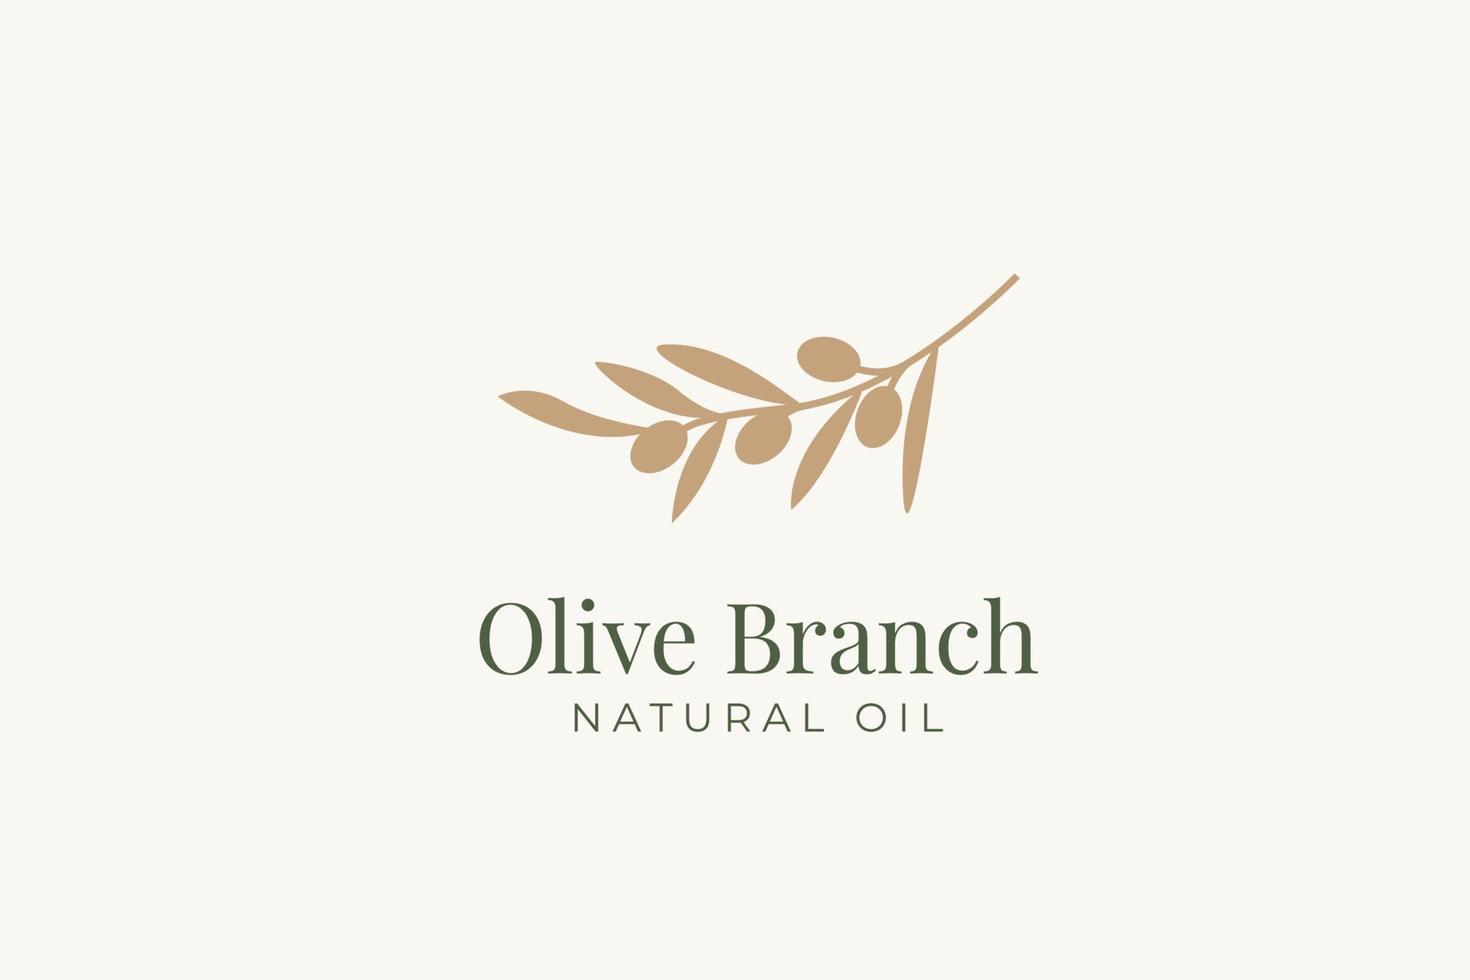 Olive branch logo and badge design vector template